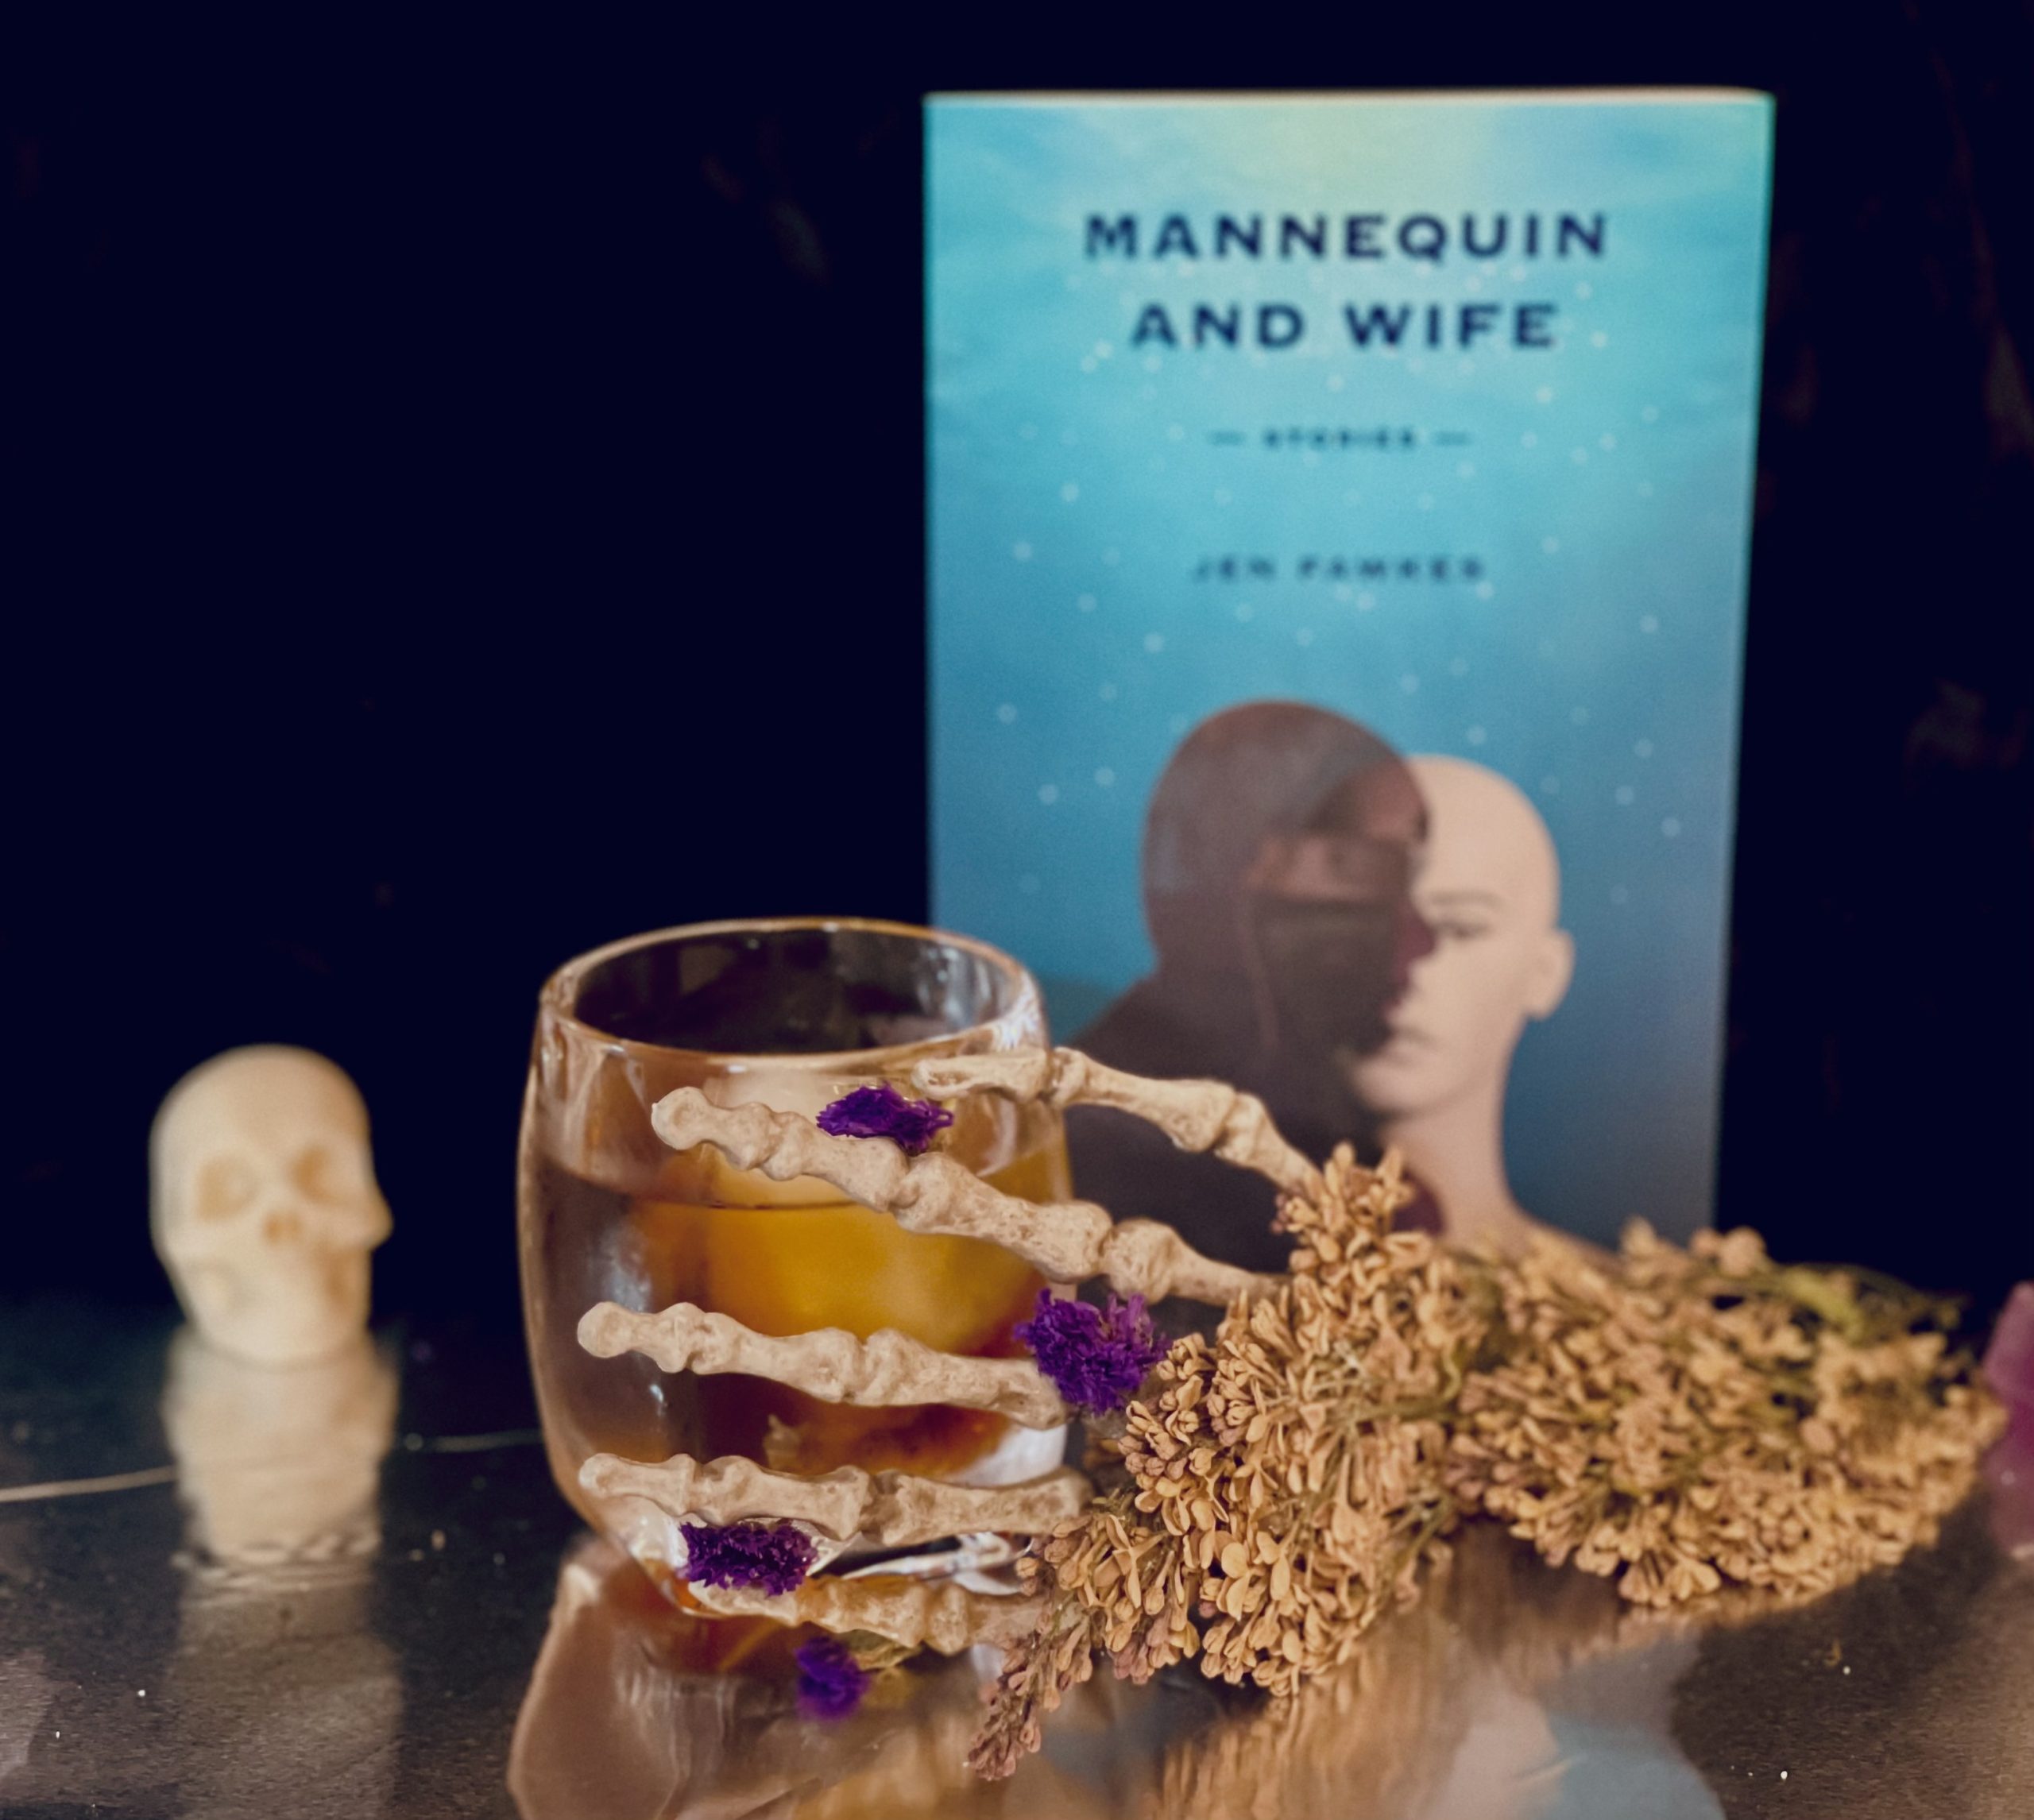 Set against a dark backdrop, a skeleton hand holds a glass containing the cocktail MANNEQUIN AND WIFE, inspired by the book of the same name, which is presented behind it.